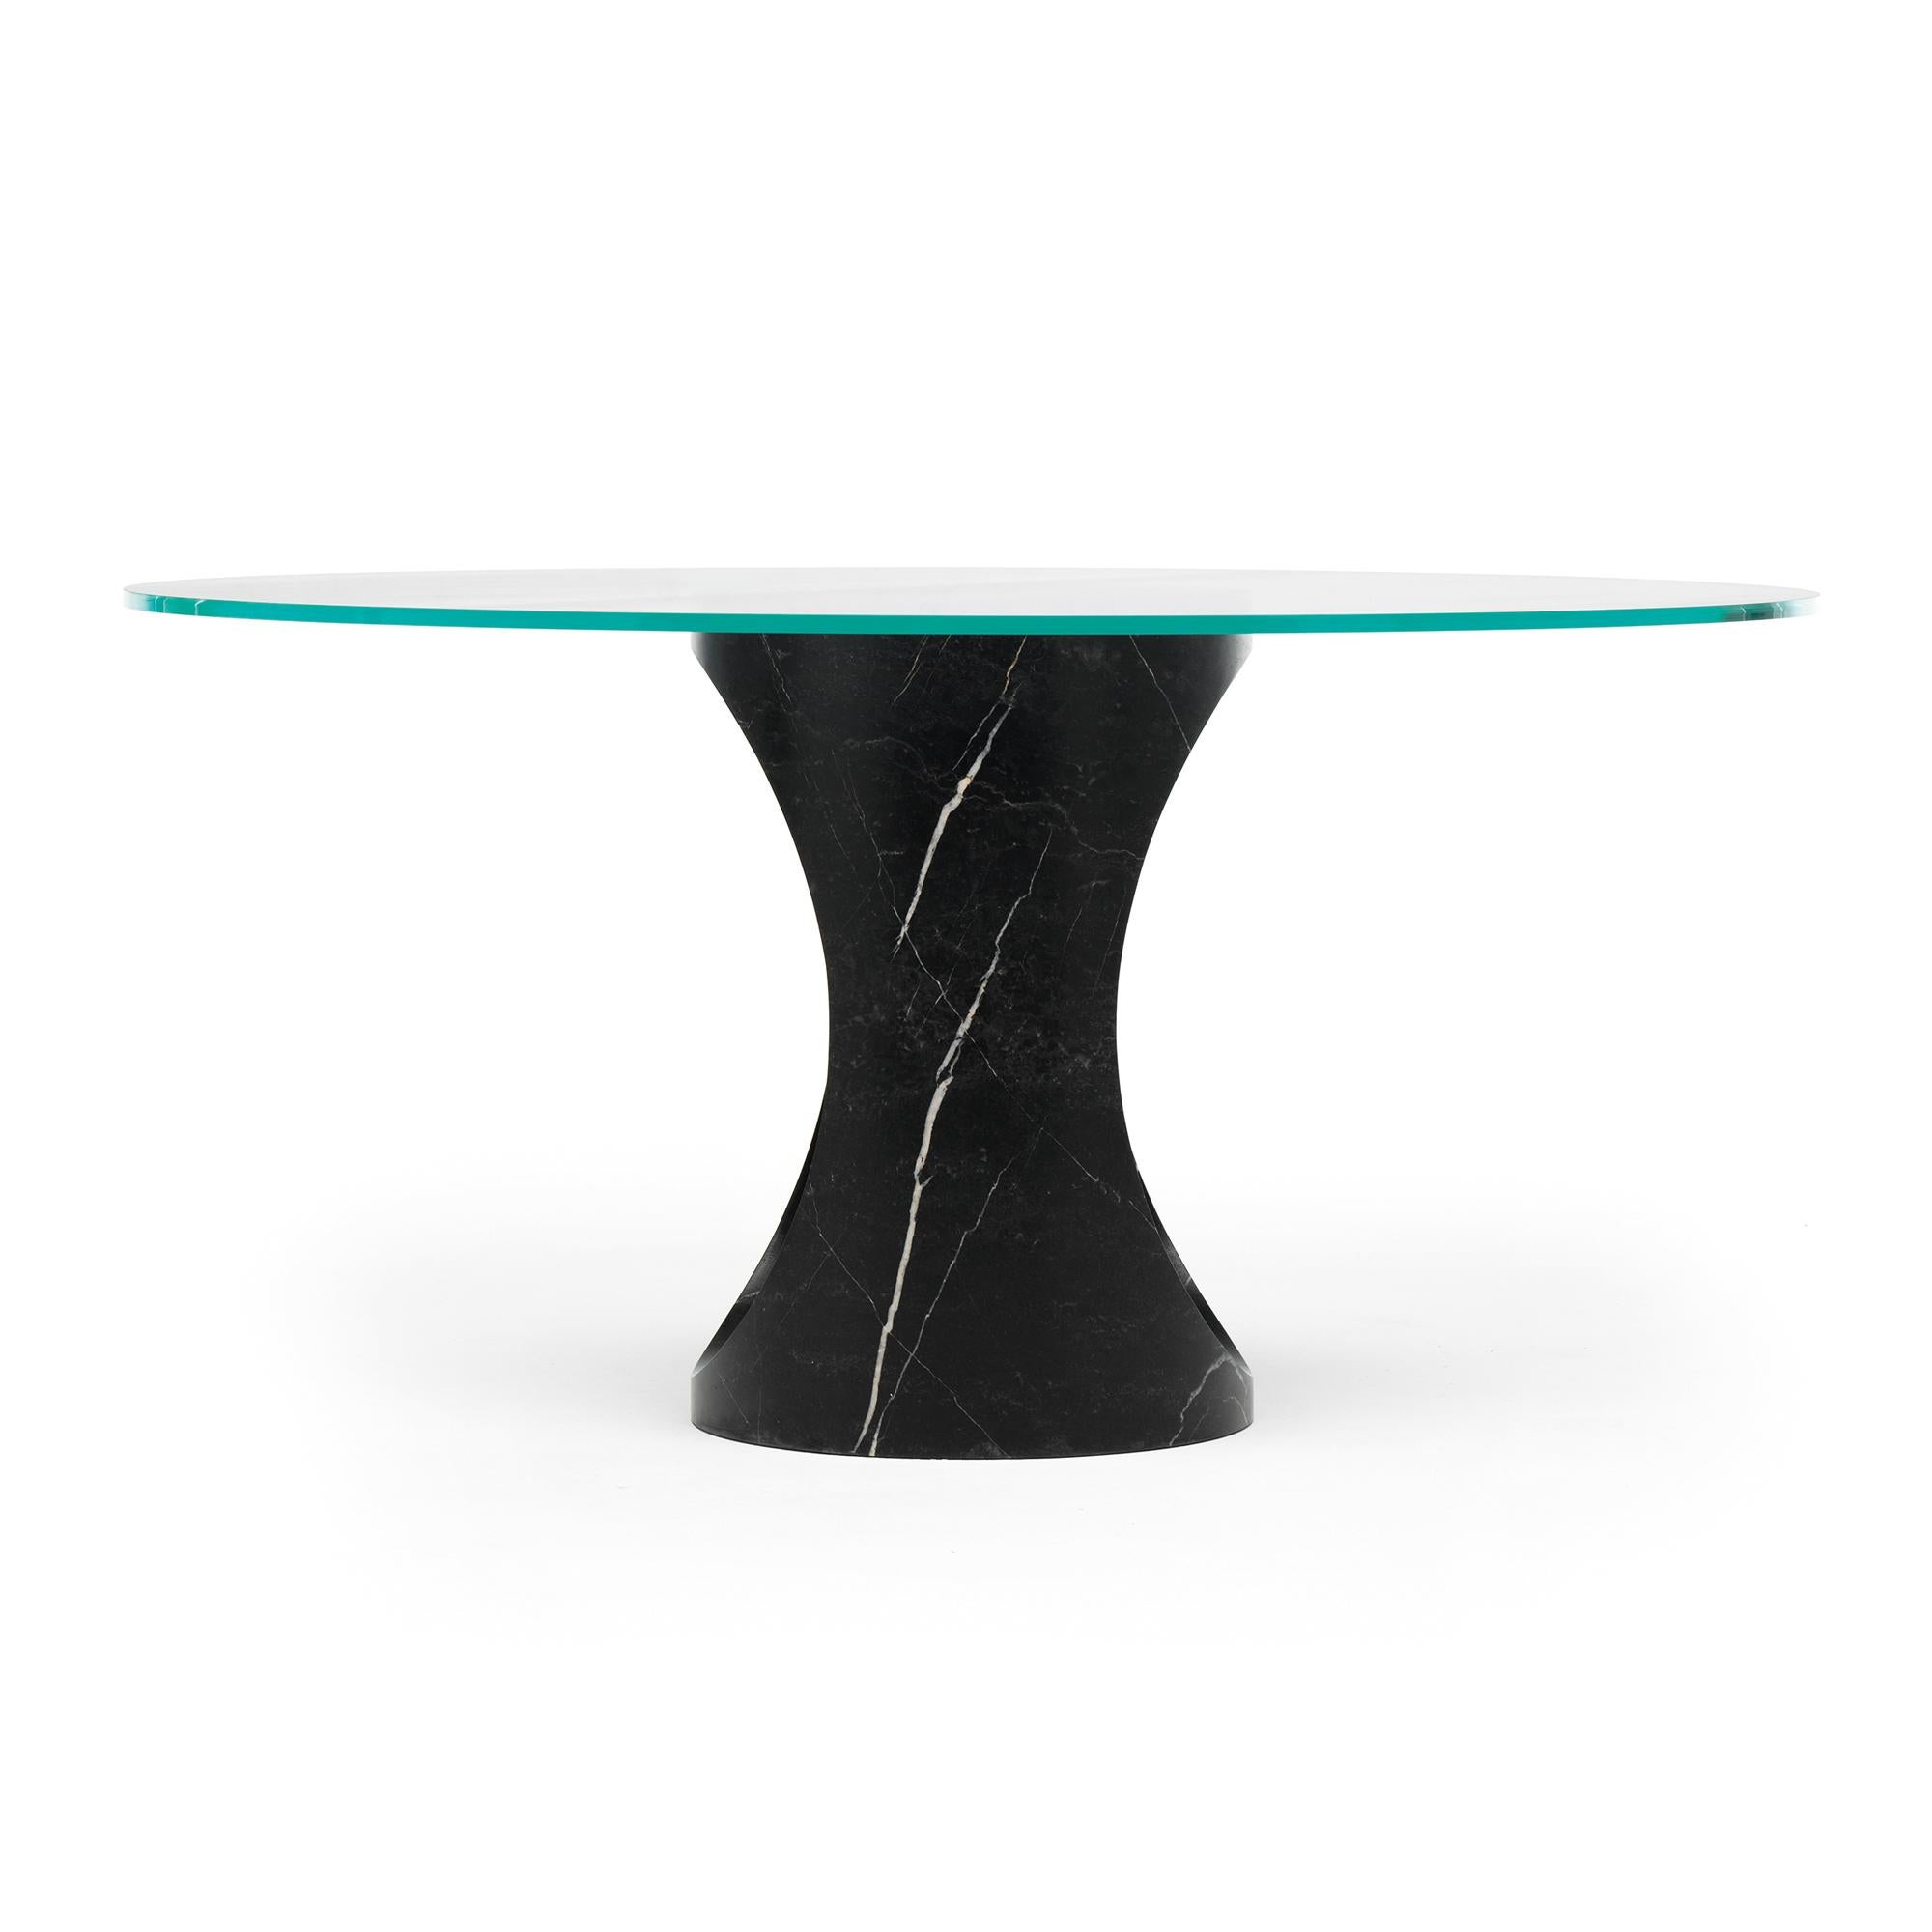 Italian 21st Century Modern Sculptural Marble Table From Block With Glass Top For Sale